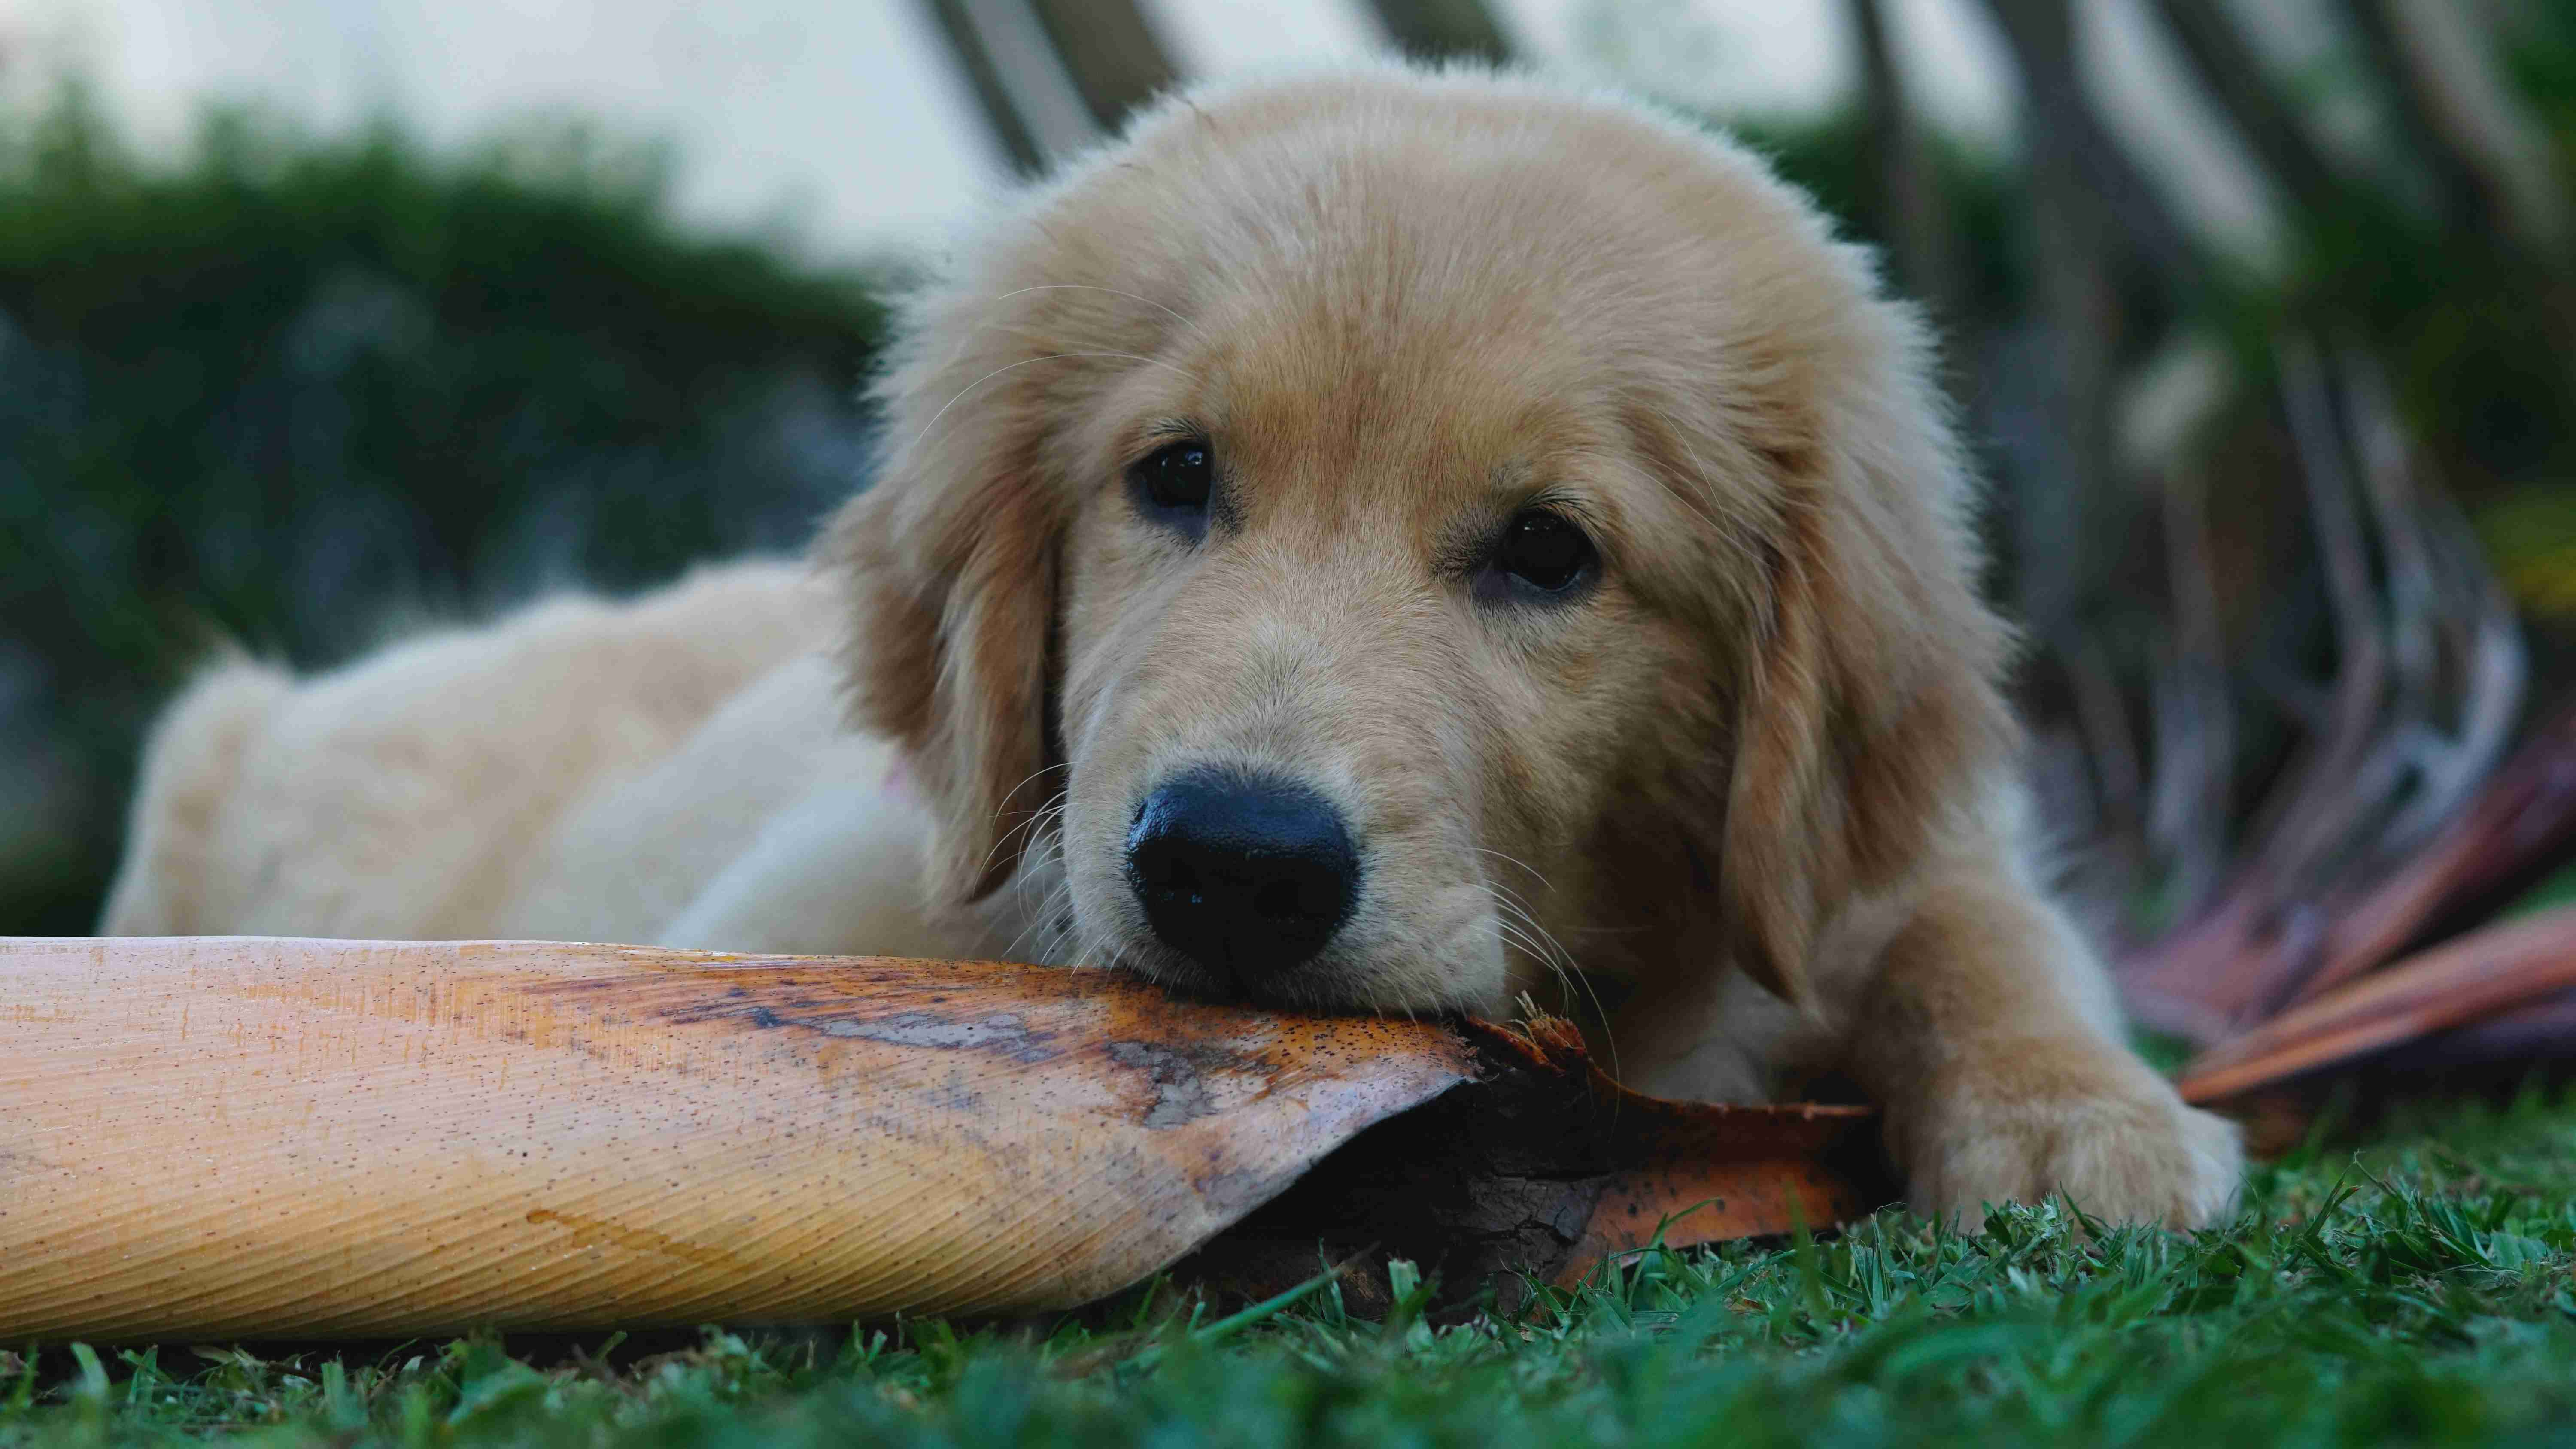 How can I prevent my golden retriever from developing allergies to fleas?